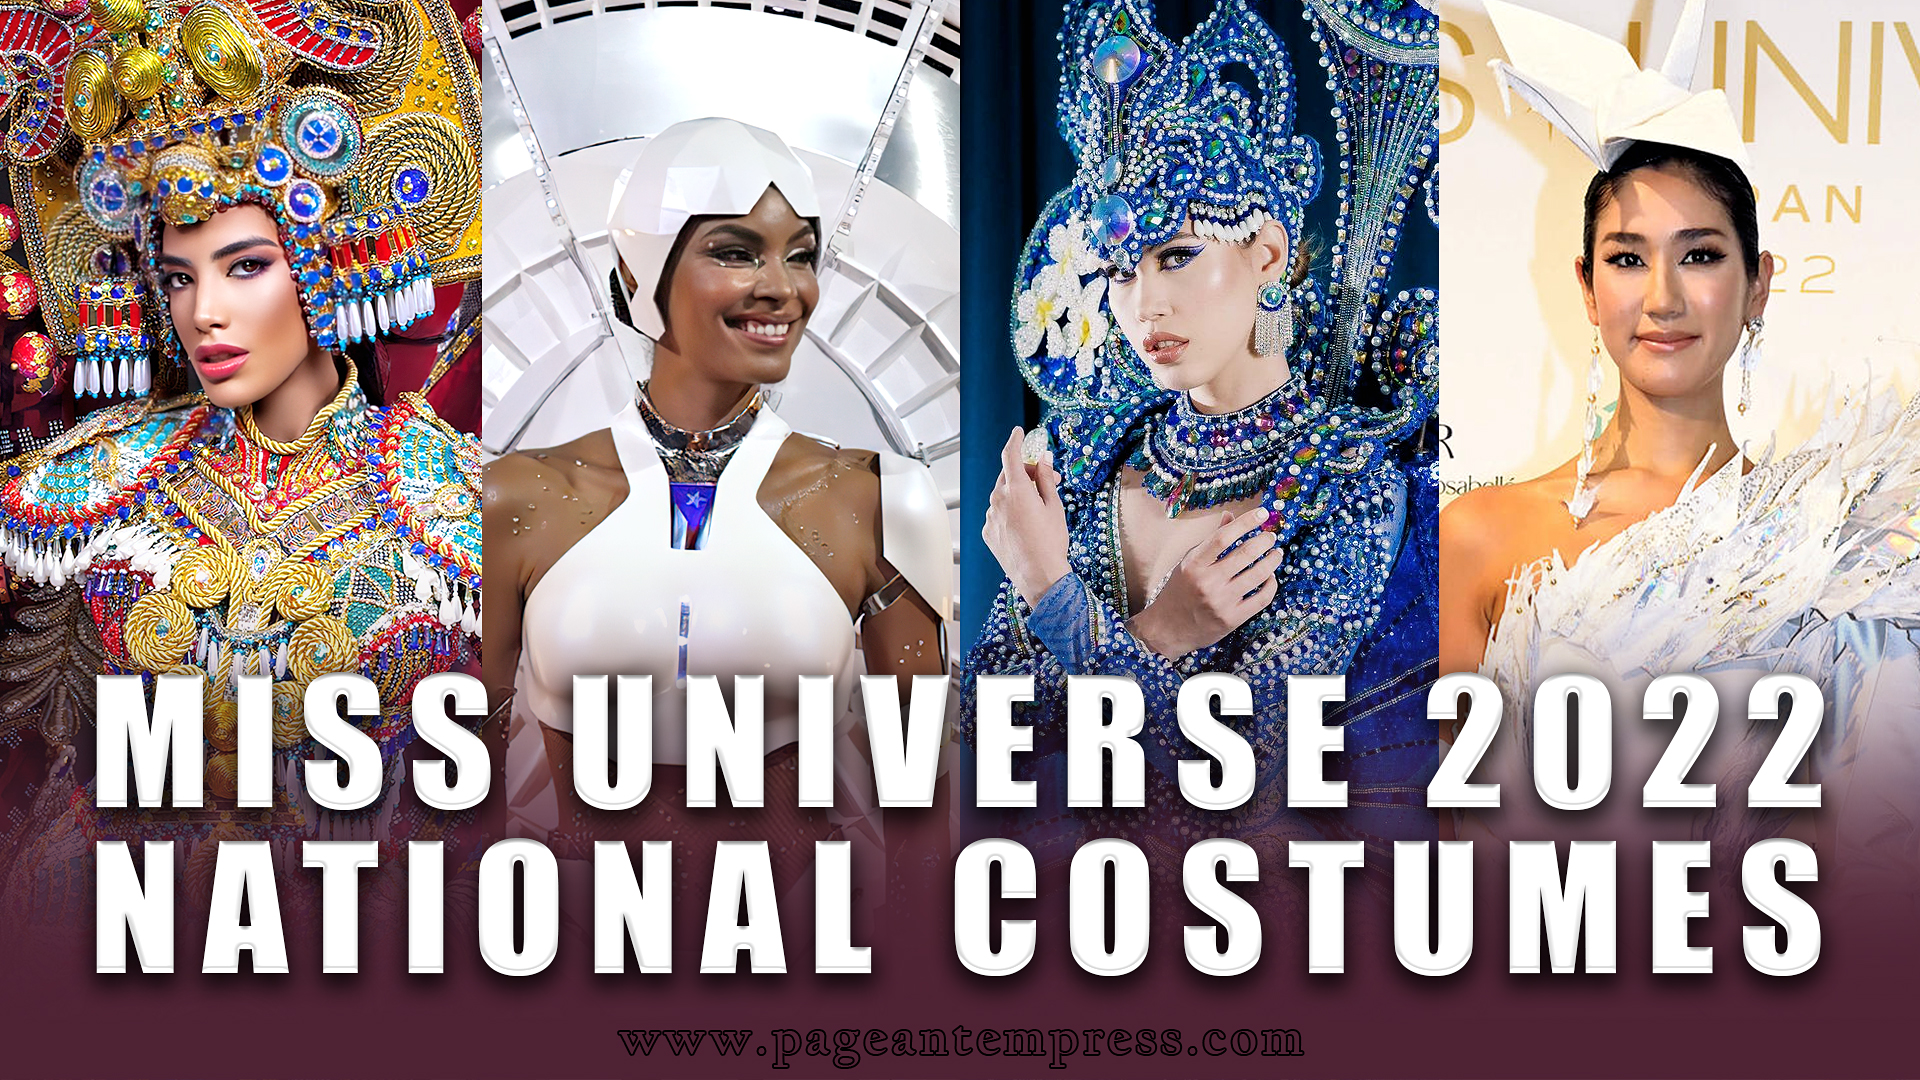 Miss Universe 2022 National Costumes from Nicaragua, Panama, Puerto Rico and Japan